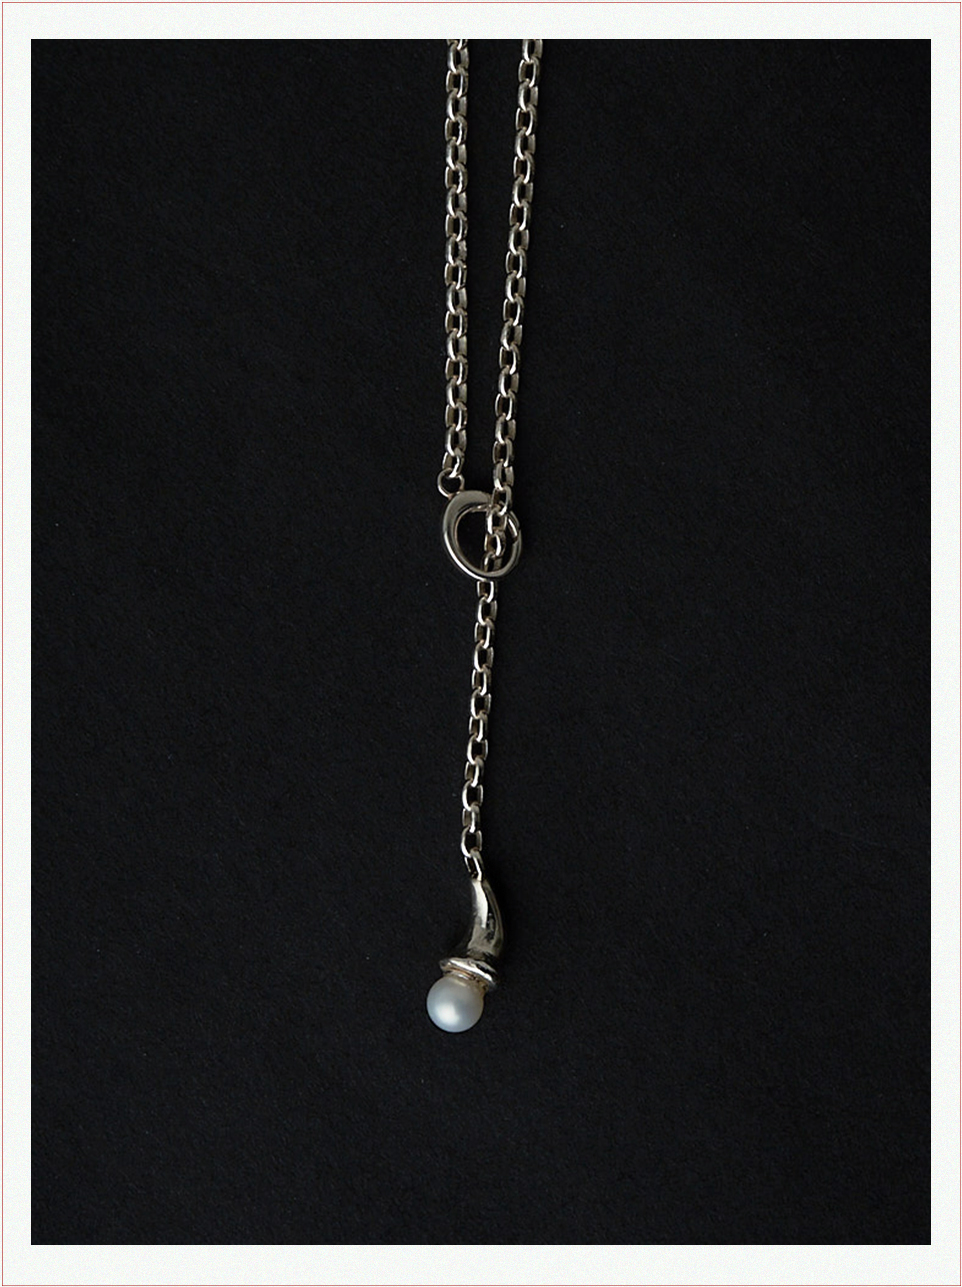 Pearl bud necklace